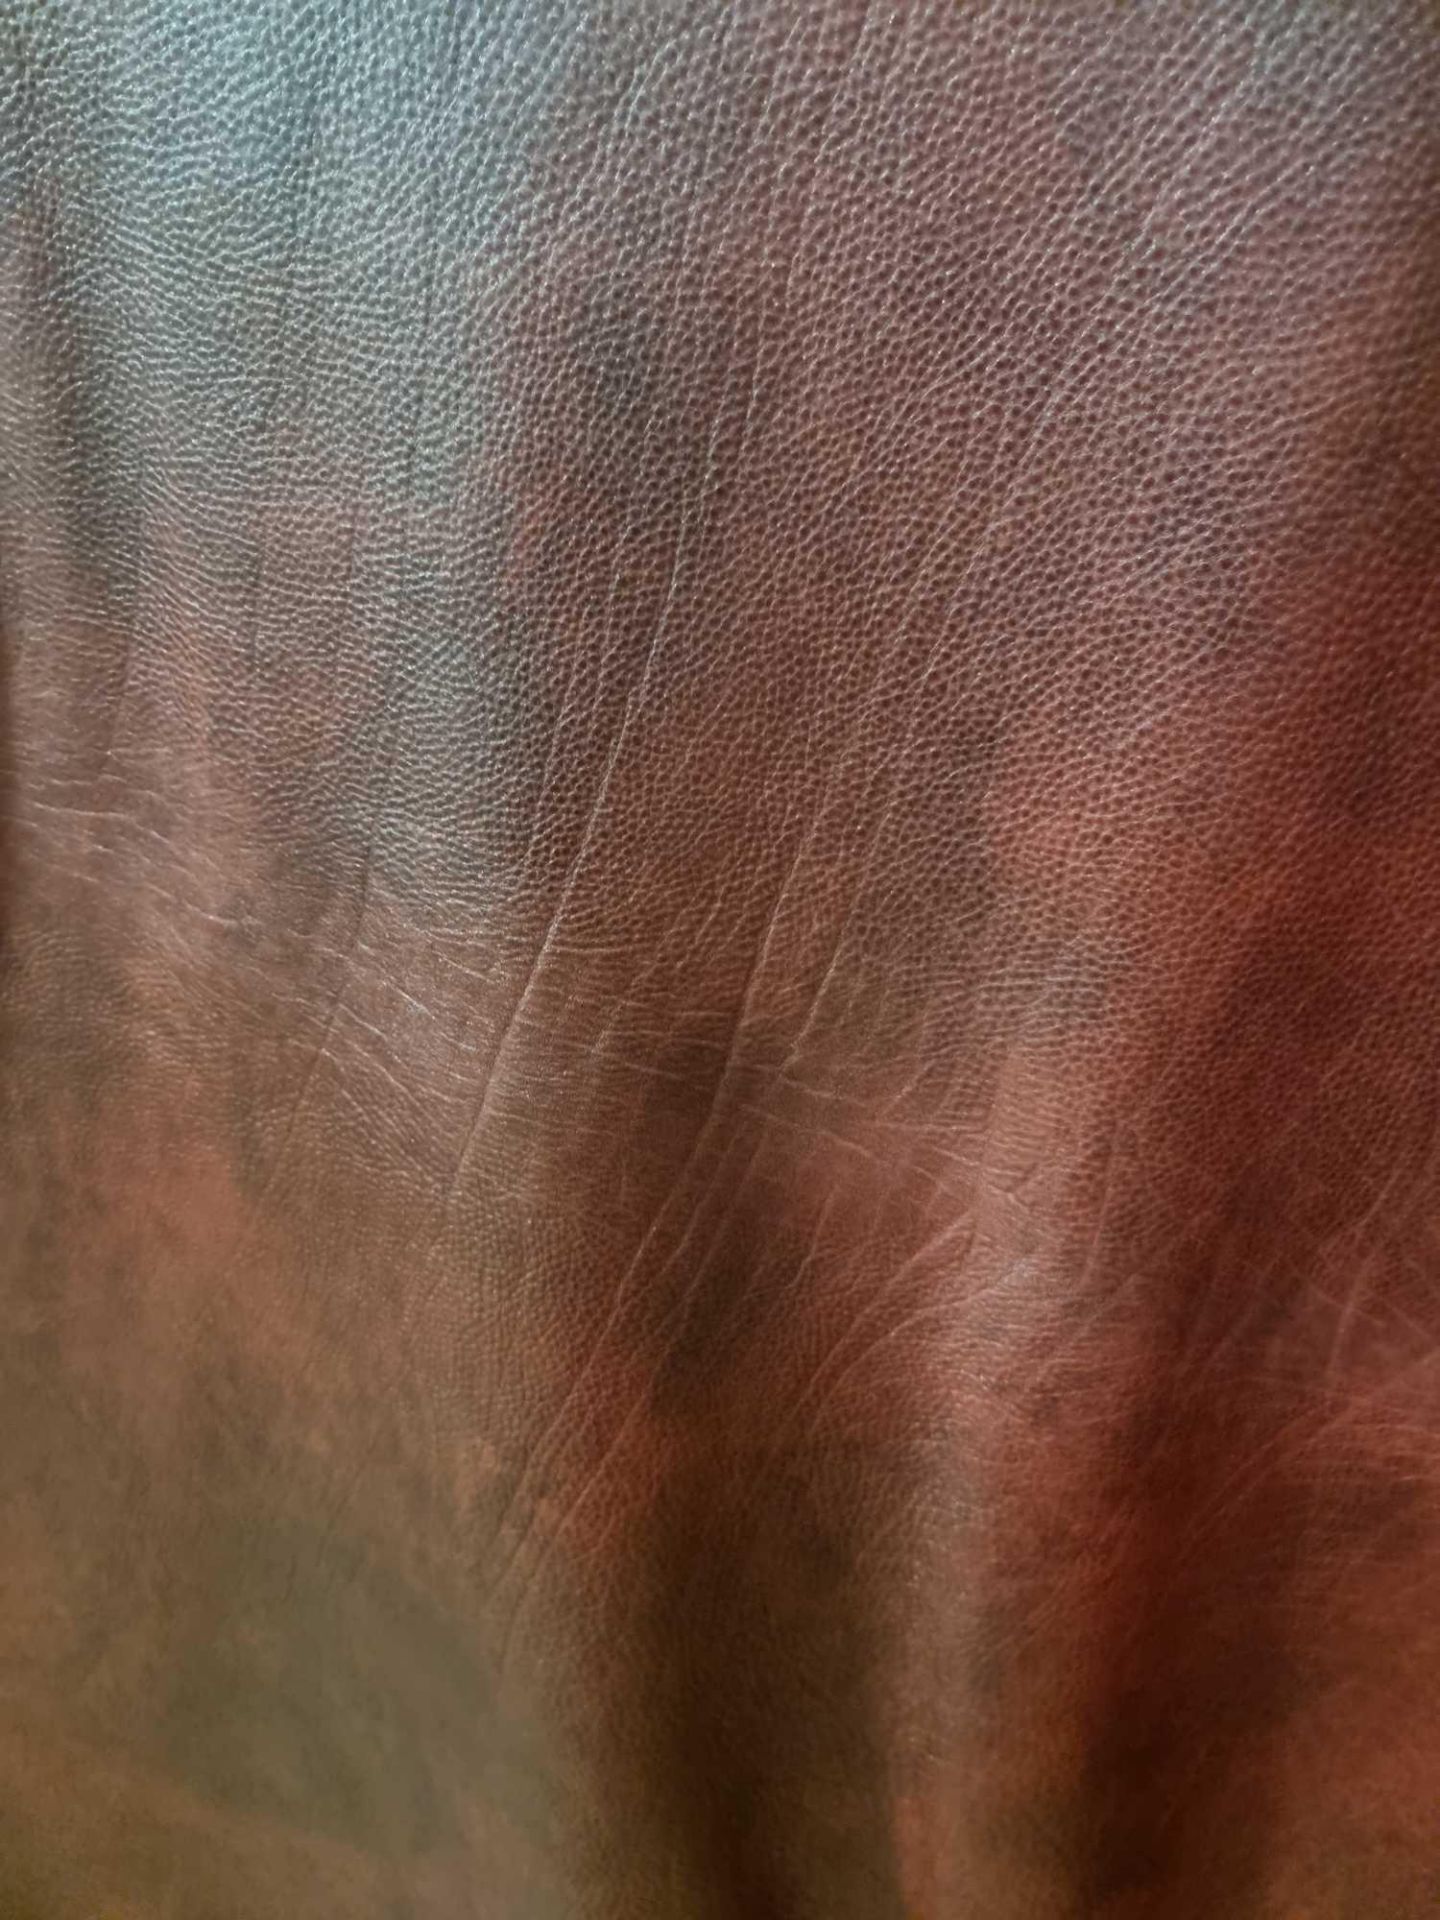 Palazzo Grenadine Leather Hide approximately 5.06mÂ² 2.3 x 2.2cm ( Hide No,44) - Image 2 of 2